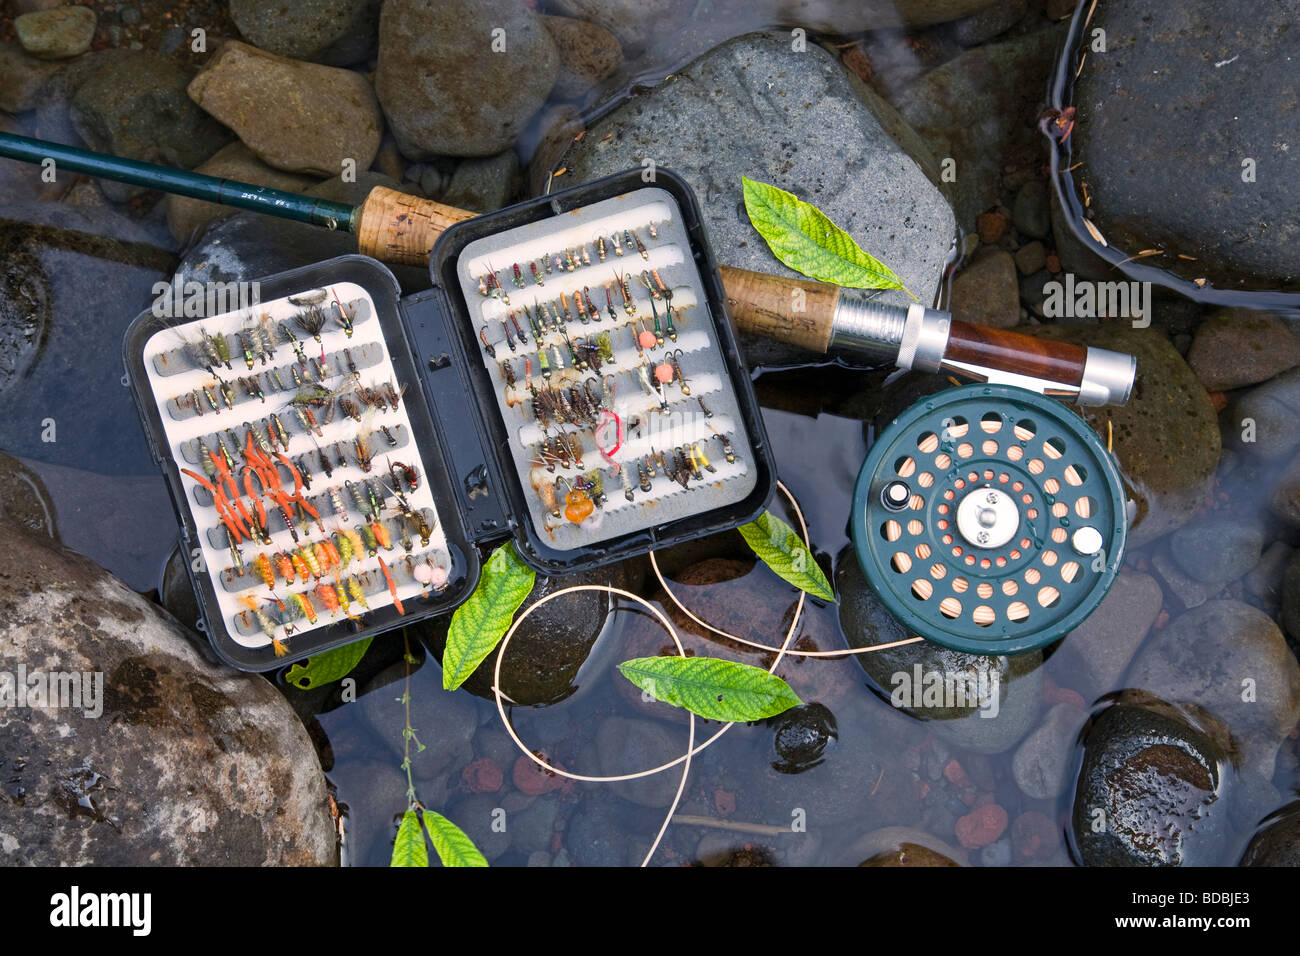 A fly rod, fly reel, trout fishing net, and box of artificial flies used for fly fishing for trout and steelhead Stock Photo